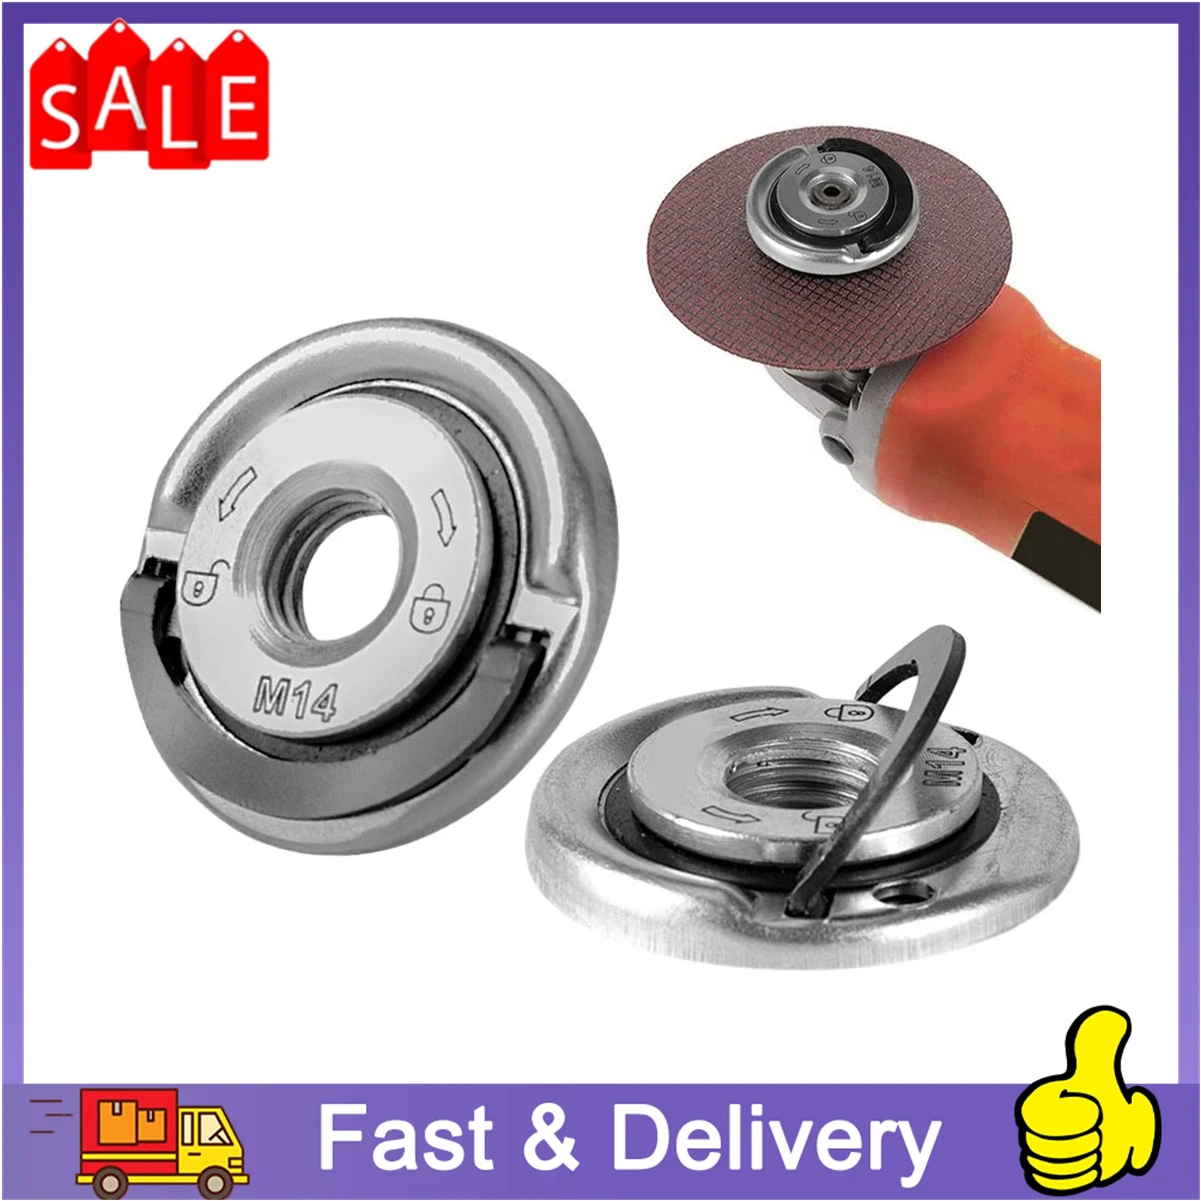 Quick Release Flange Nut M14 Thread Angle Grinder Release Locking Nut Pressing Plate For Angle Grinder Clamping Flange Accessory quick release flange nut m14 thread angle grinder release locking nut pressing plate for angle grinder clamping flange accessory